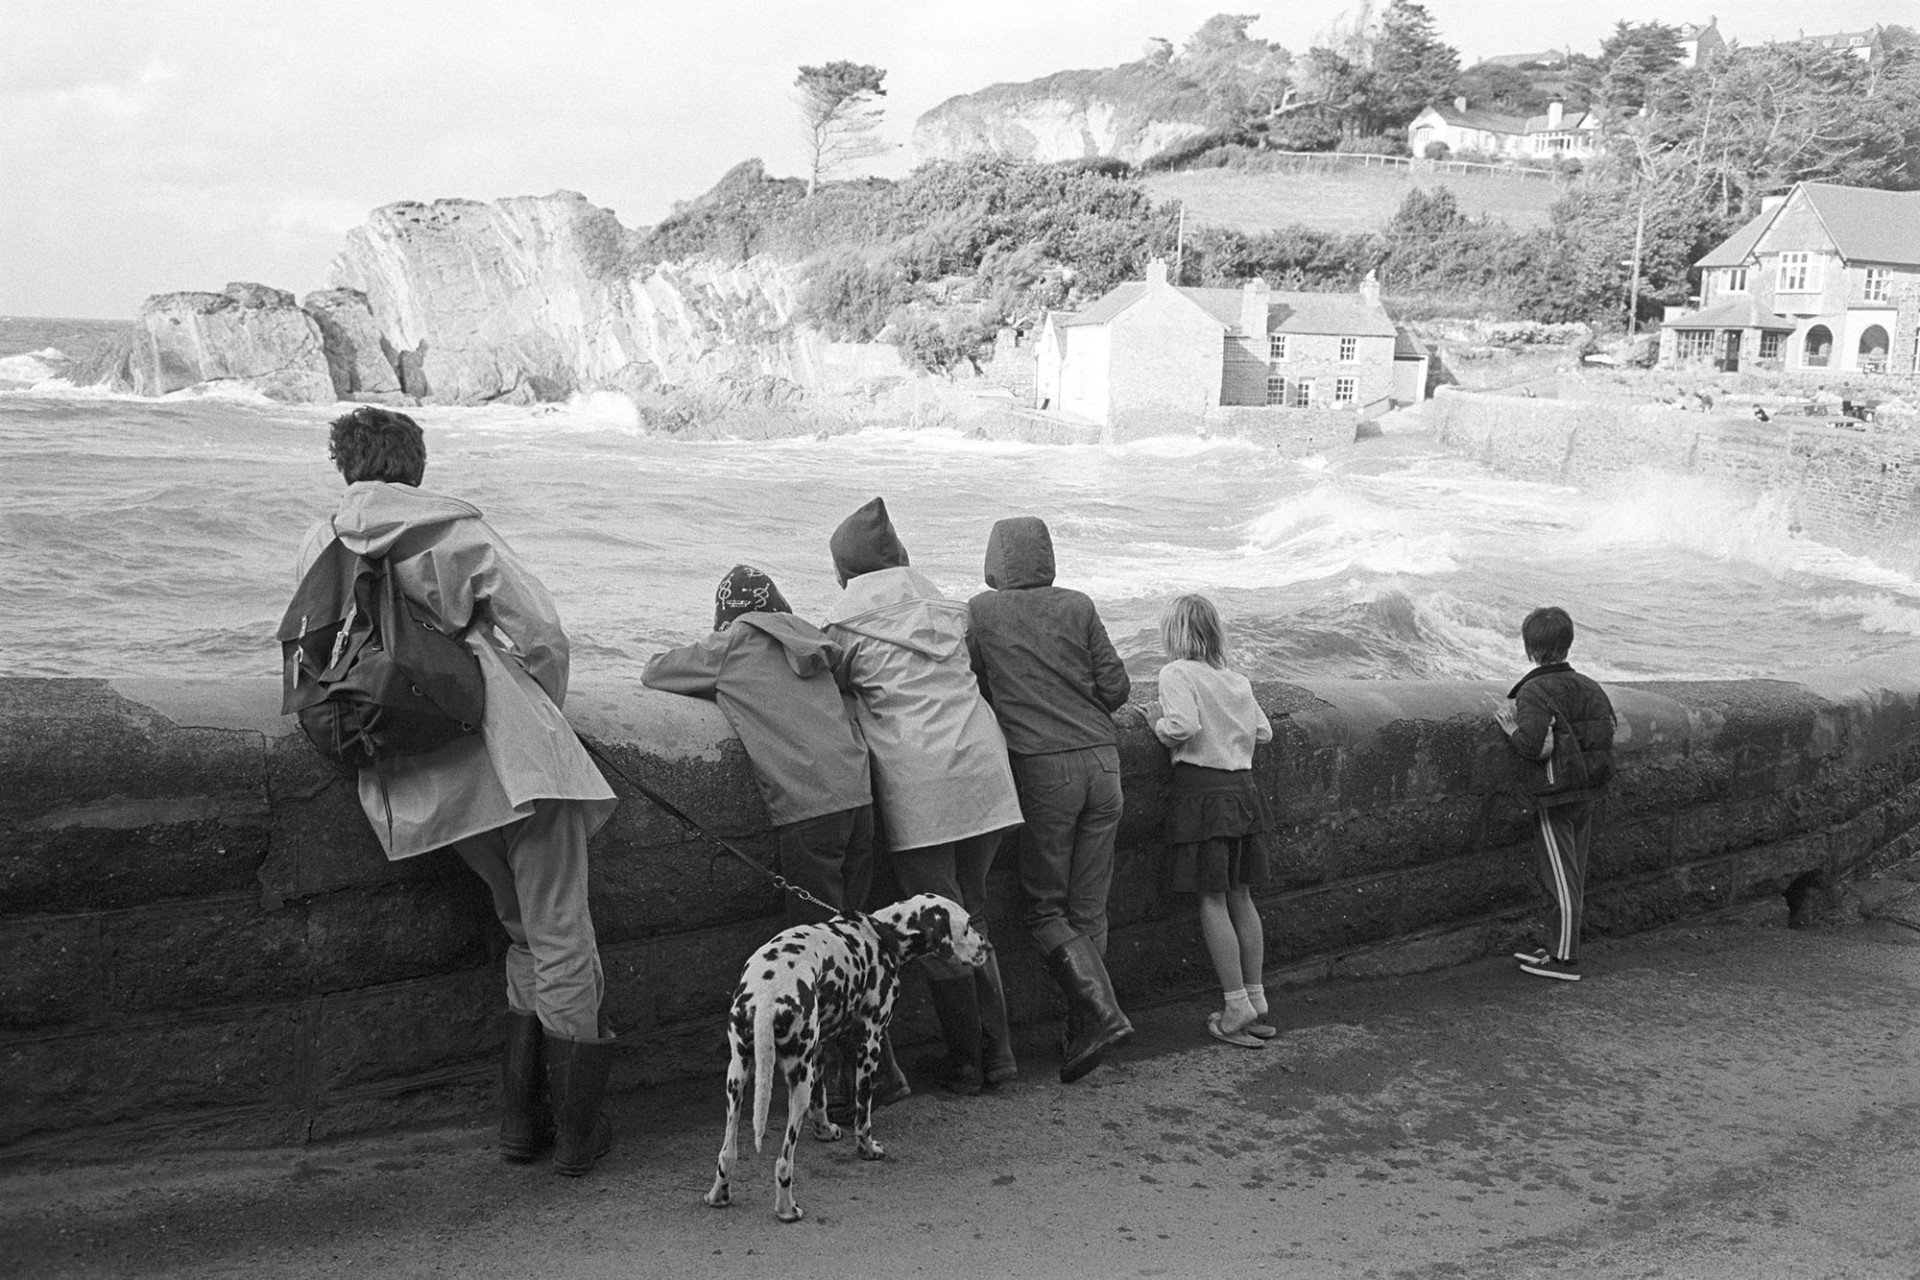 Holidaymakers watching rough seas across bay, leaning on sea wall, dog. 
[Holidaymakers leaning on the sea wall at Lee Bay and watching waves crashing. Cliffs and buildings can be seen across the bay. One of the holidaymakers has a dog.]